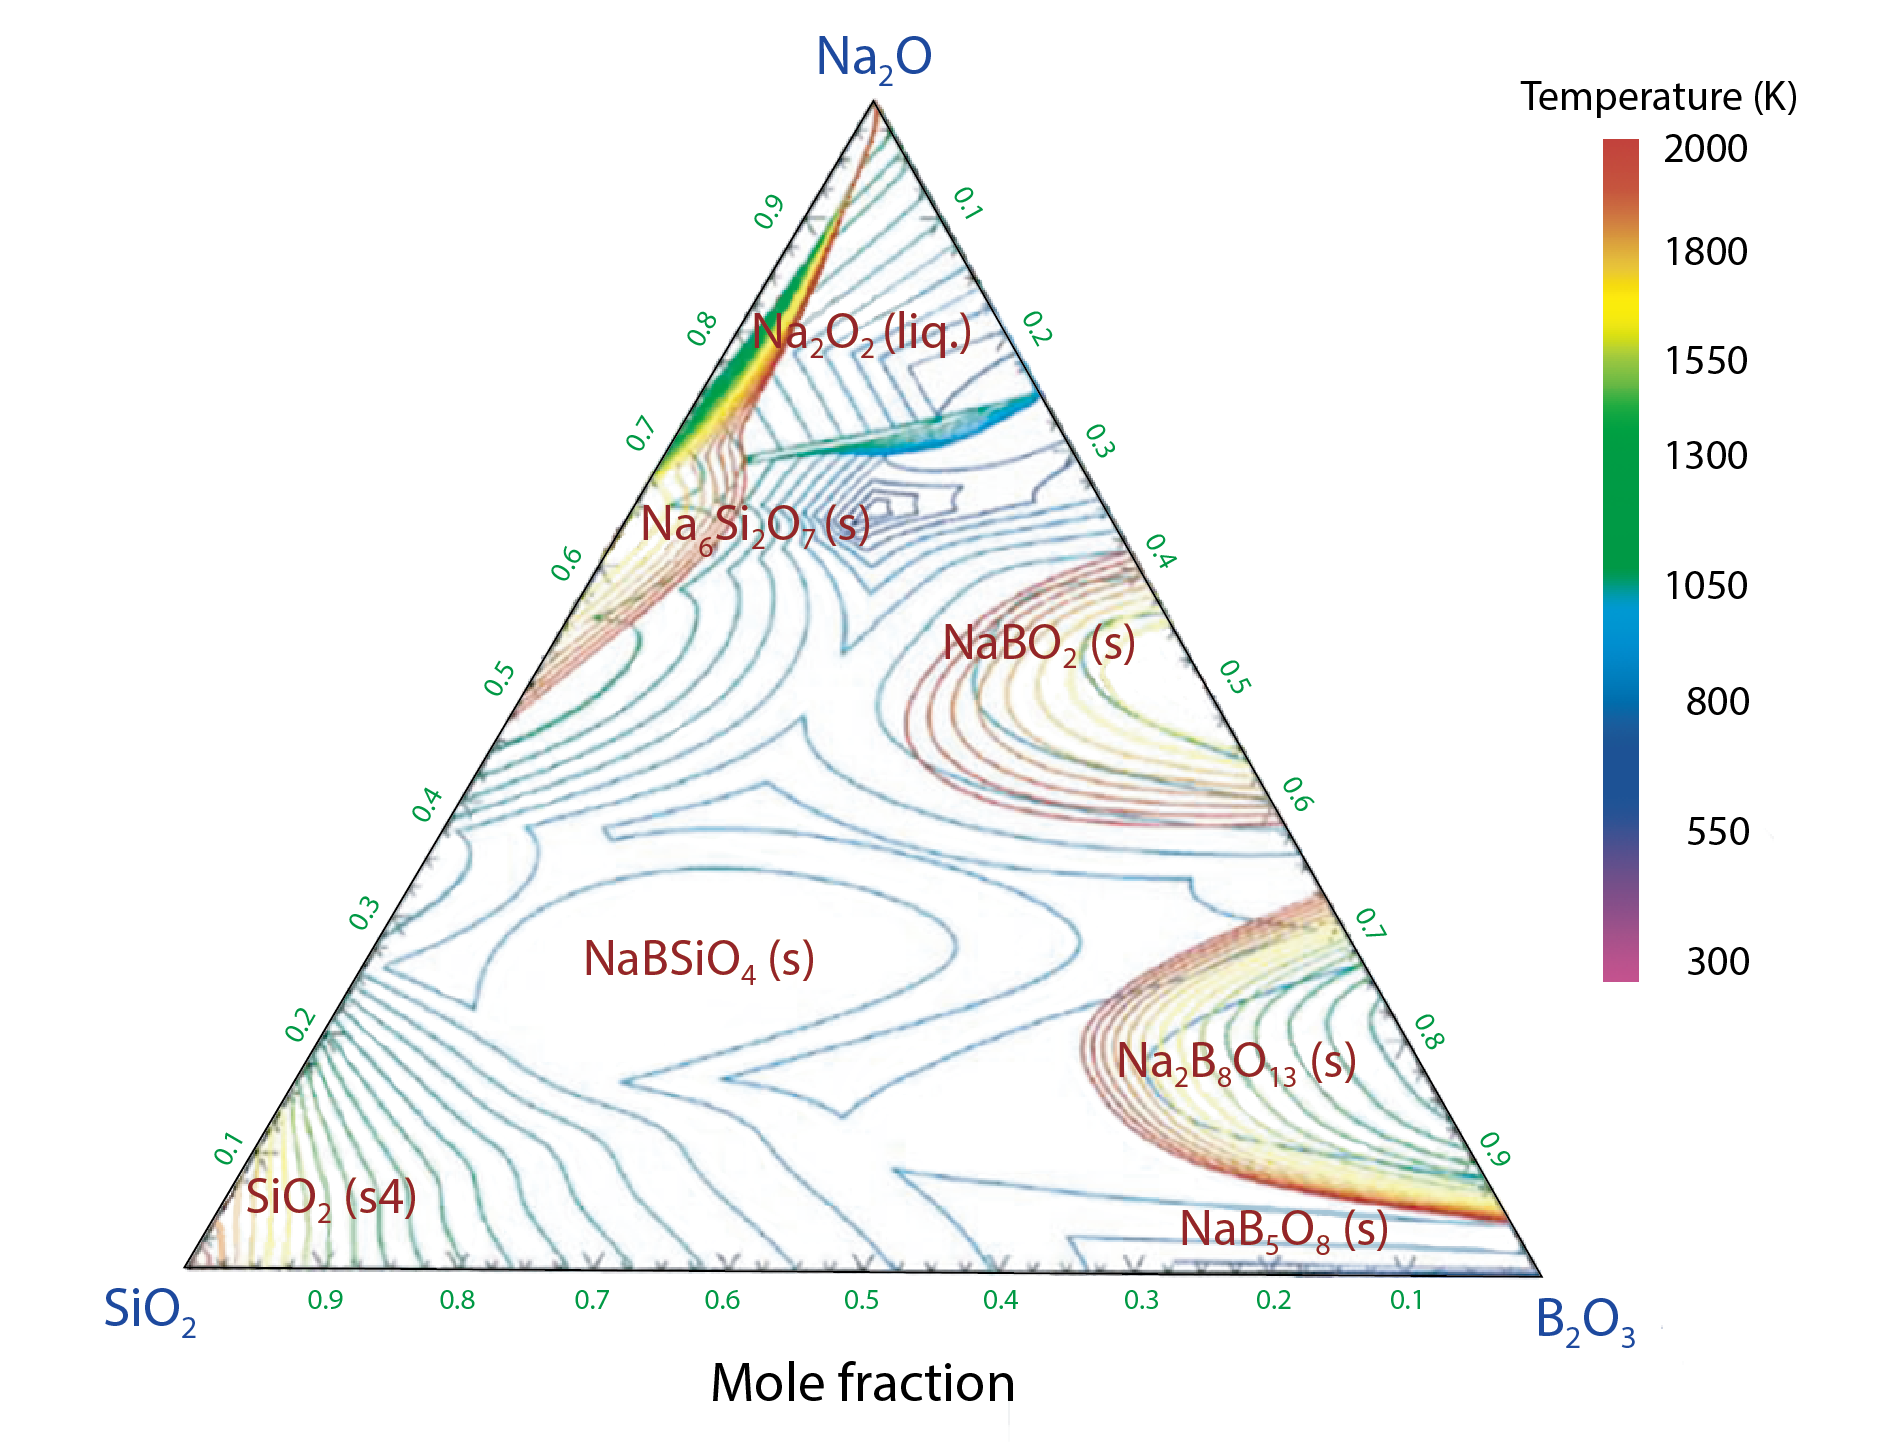 Fig.8-21  Liquidus surface projection for the SiO2-B2O3-Na2O ternary system